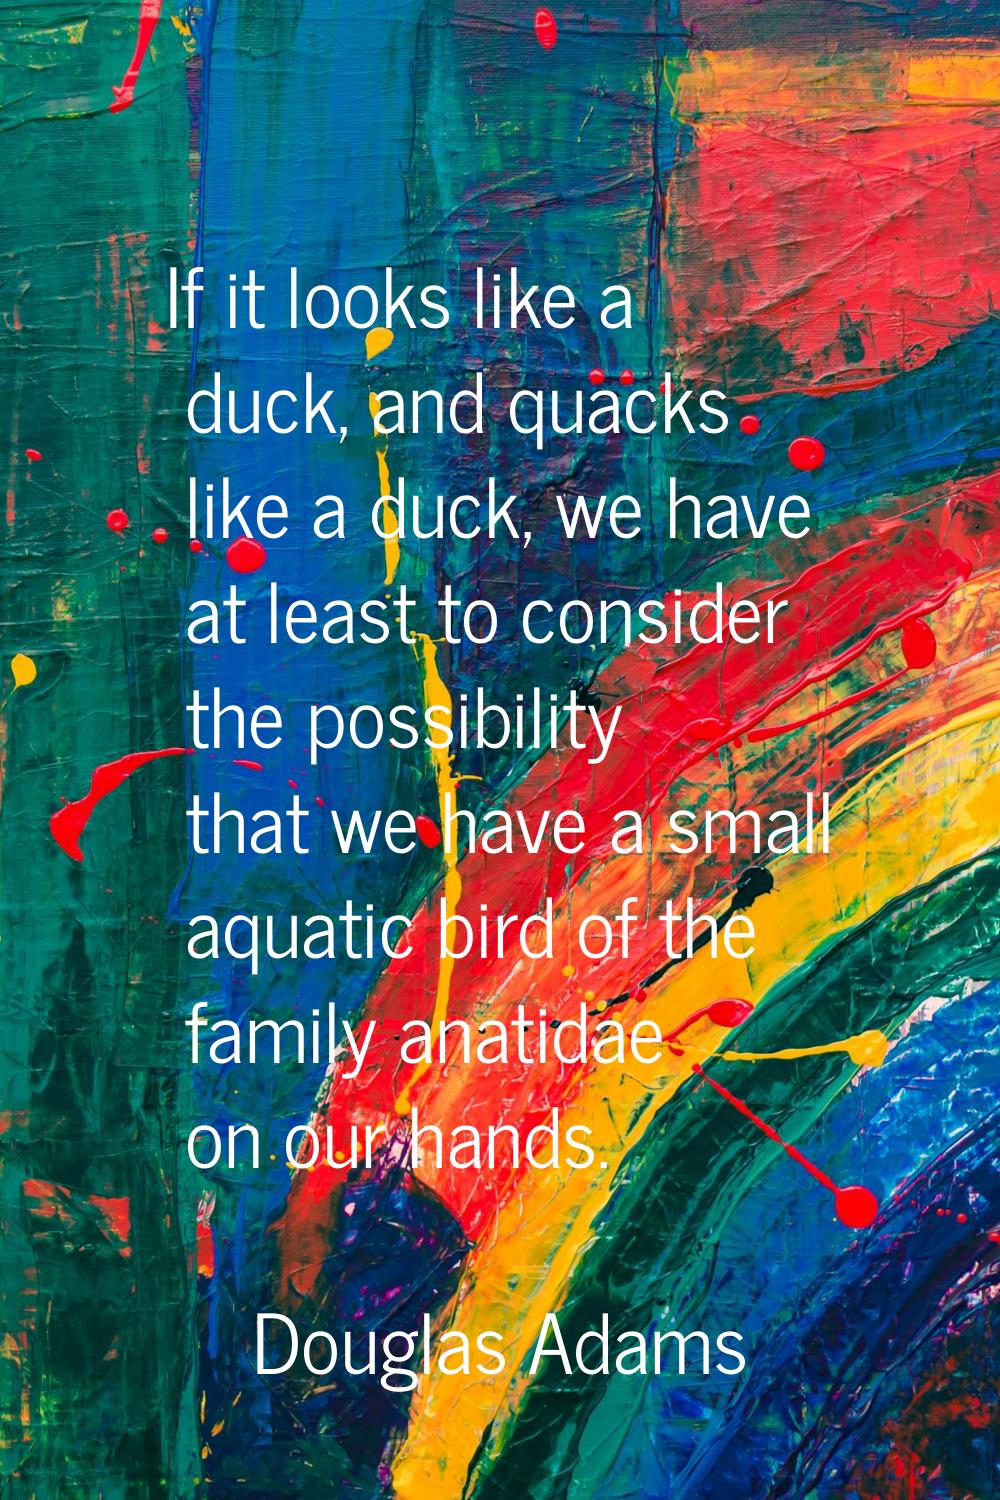 If it looks like a duck, and quacks like a duck, we have at least to consider the possibility that 